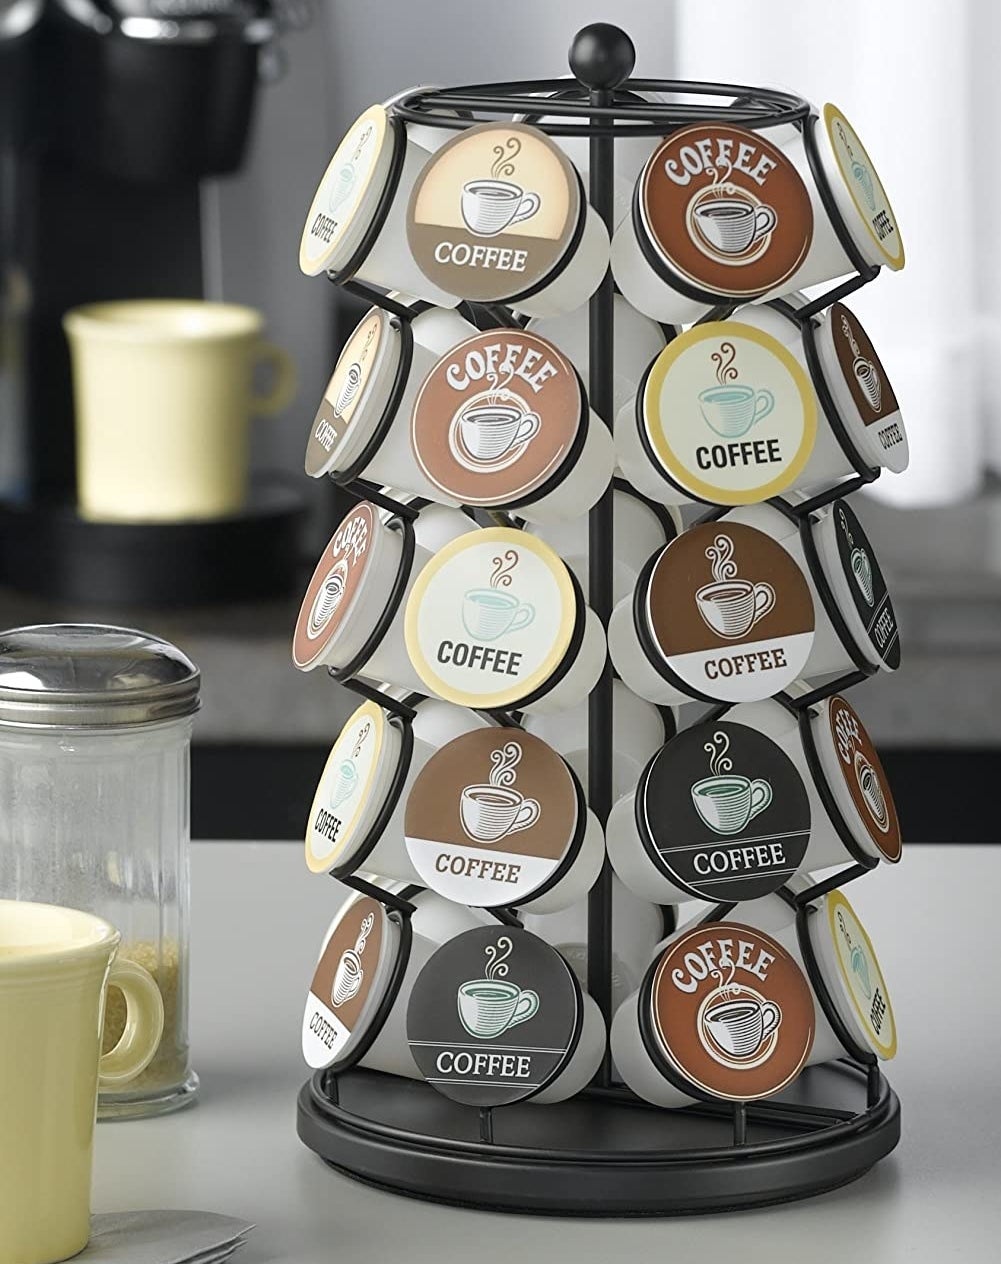 the black carousel holding various k-cups